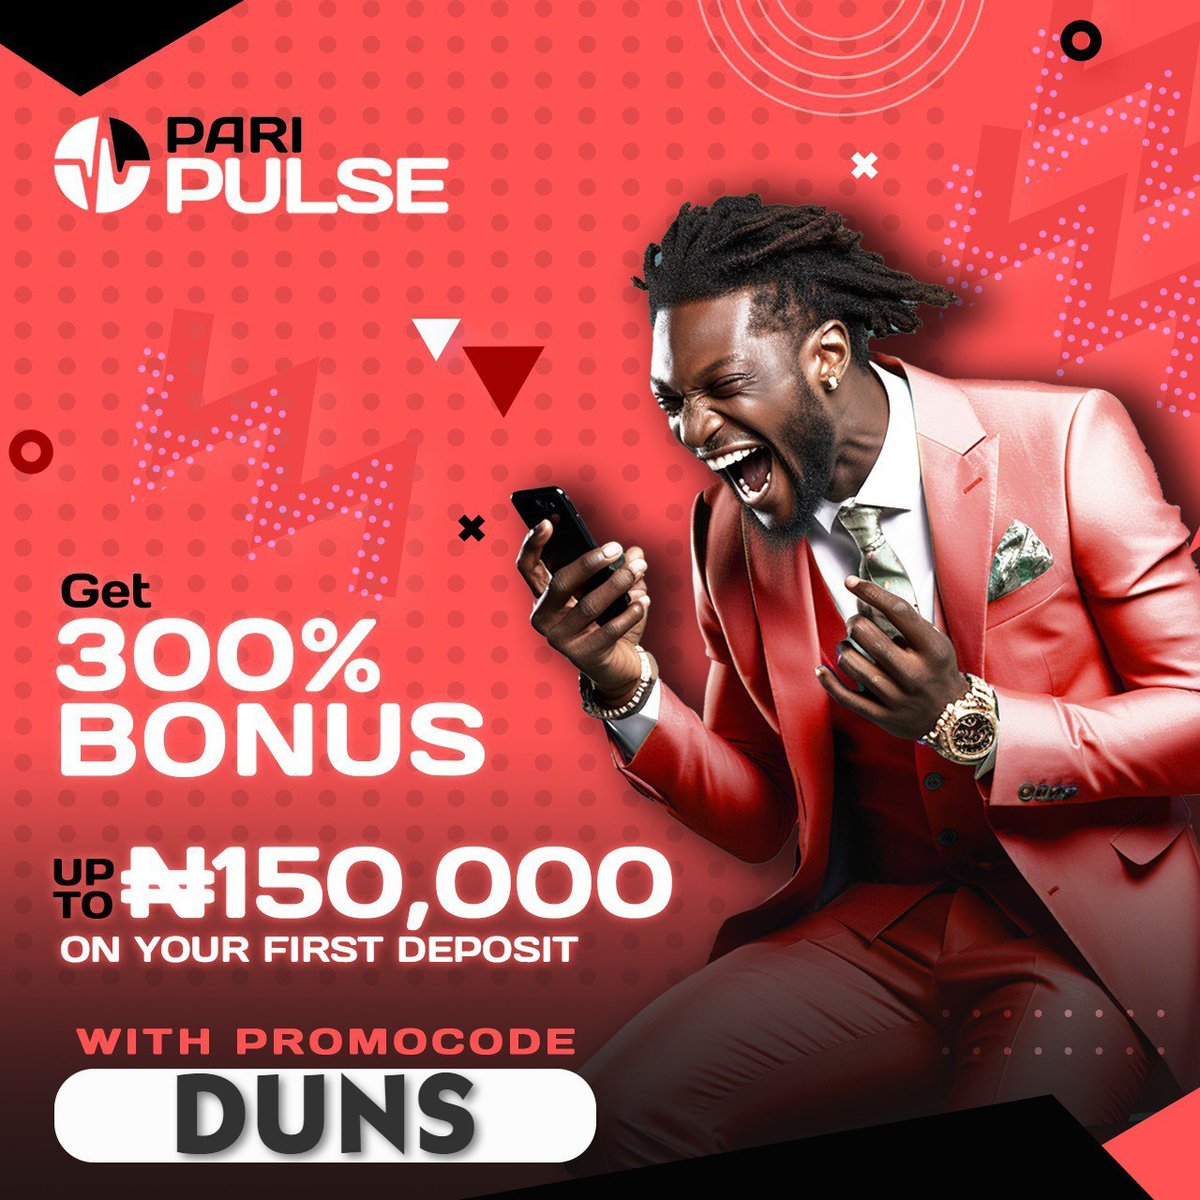 10 odds on Paripulse Get a 300% welcome bonus on your first deposit when you sign up as a new customer Don't have an account Sign up now 👉 pari-pulse.com/Adun